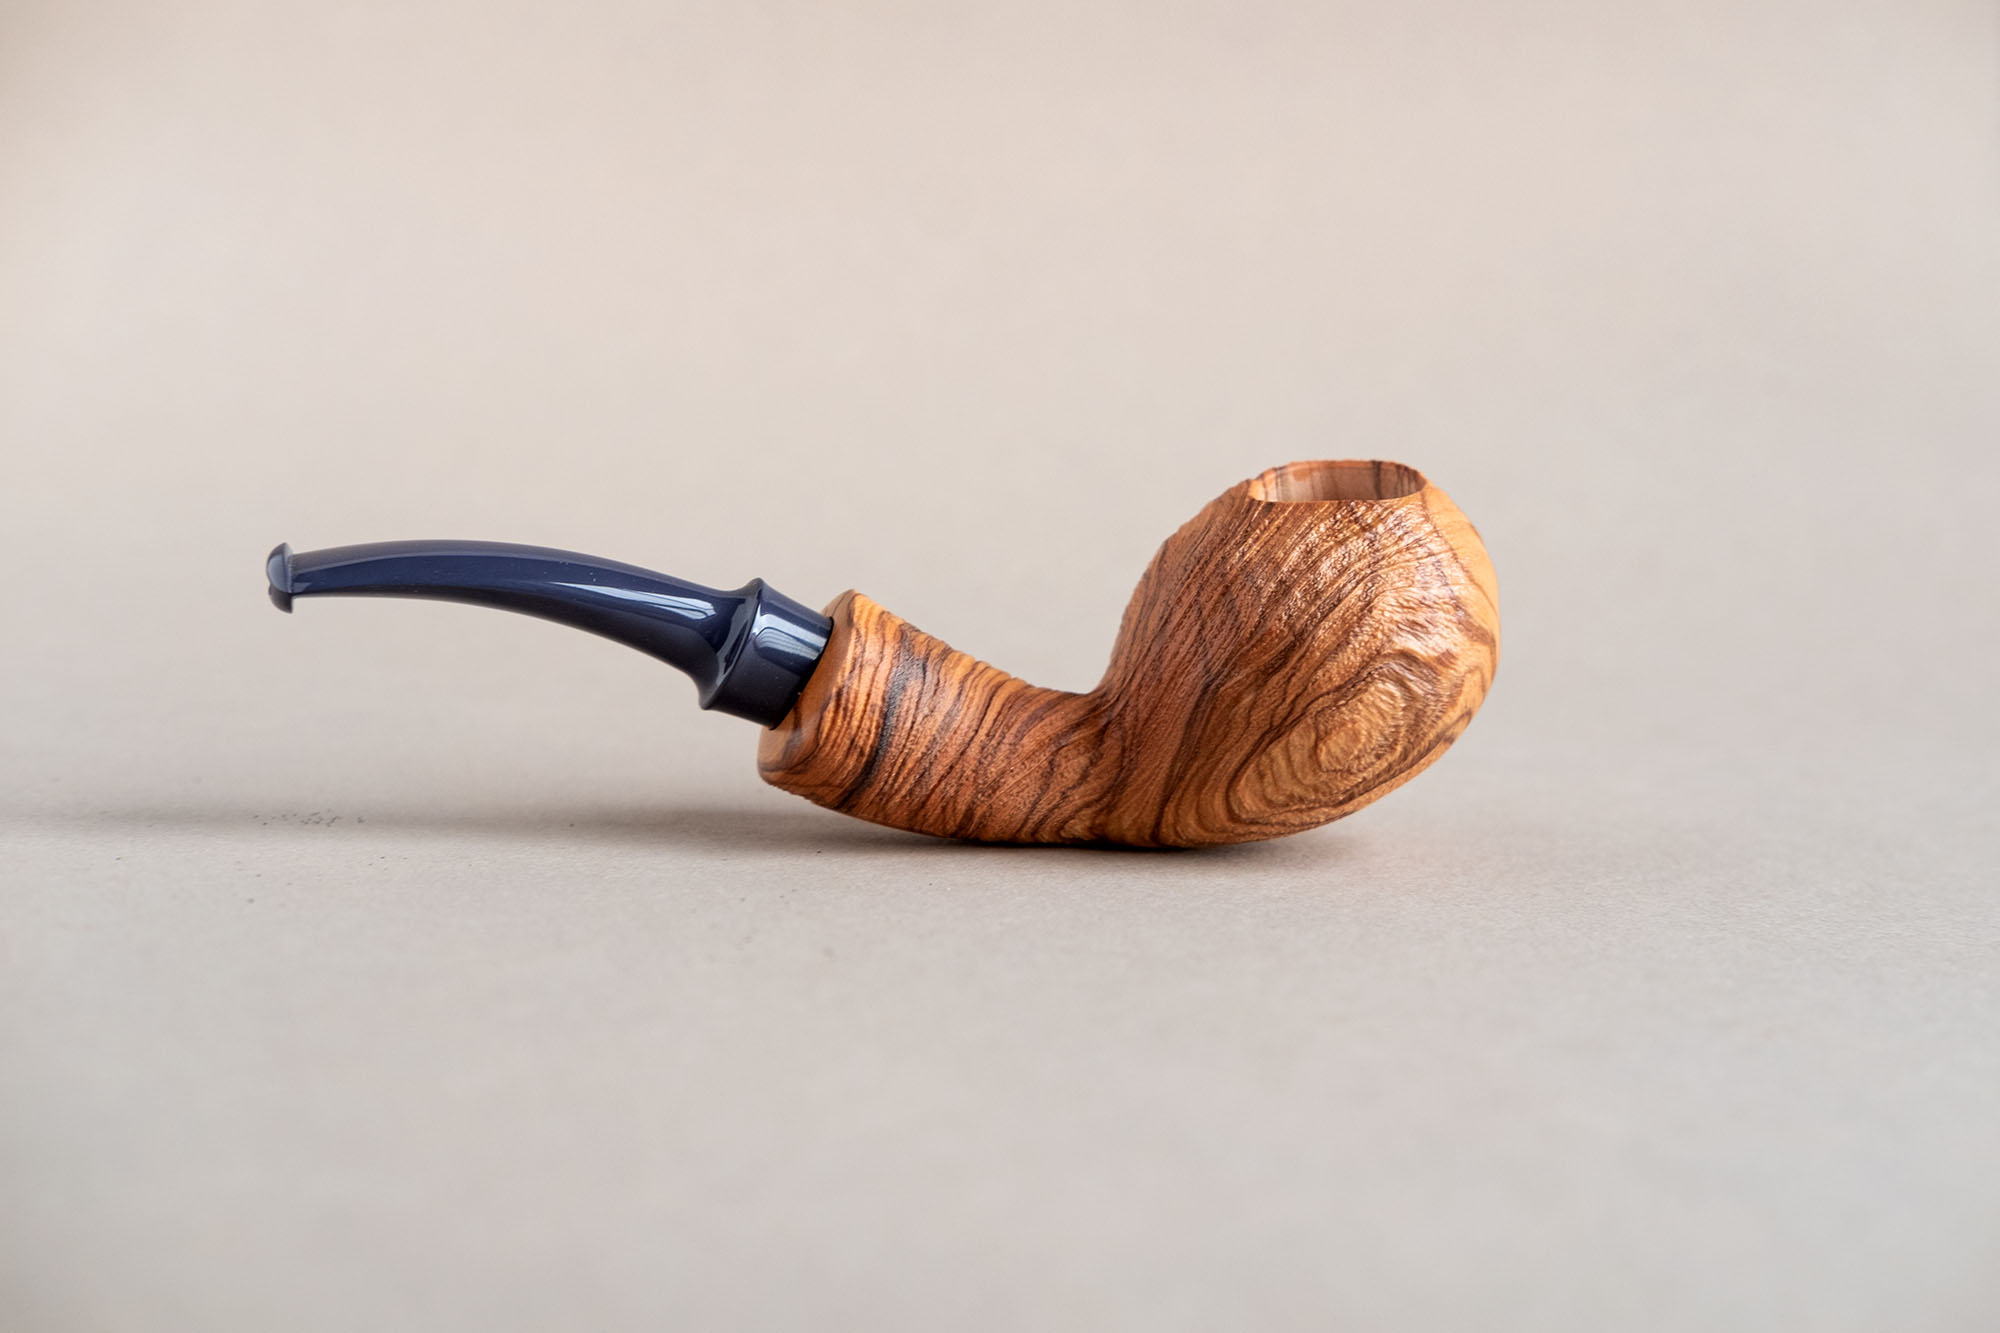 Tomato smoking pipe, free hand olive wood sandblasted pipe. hand crafted by Arcangelo Ambrosi